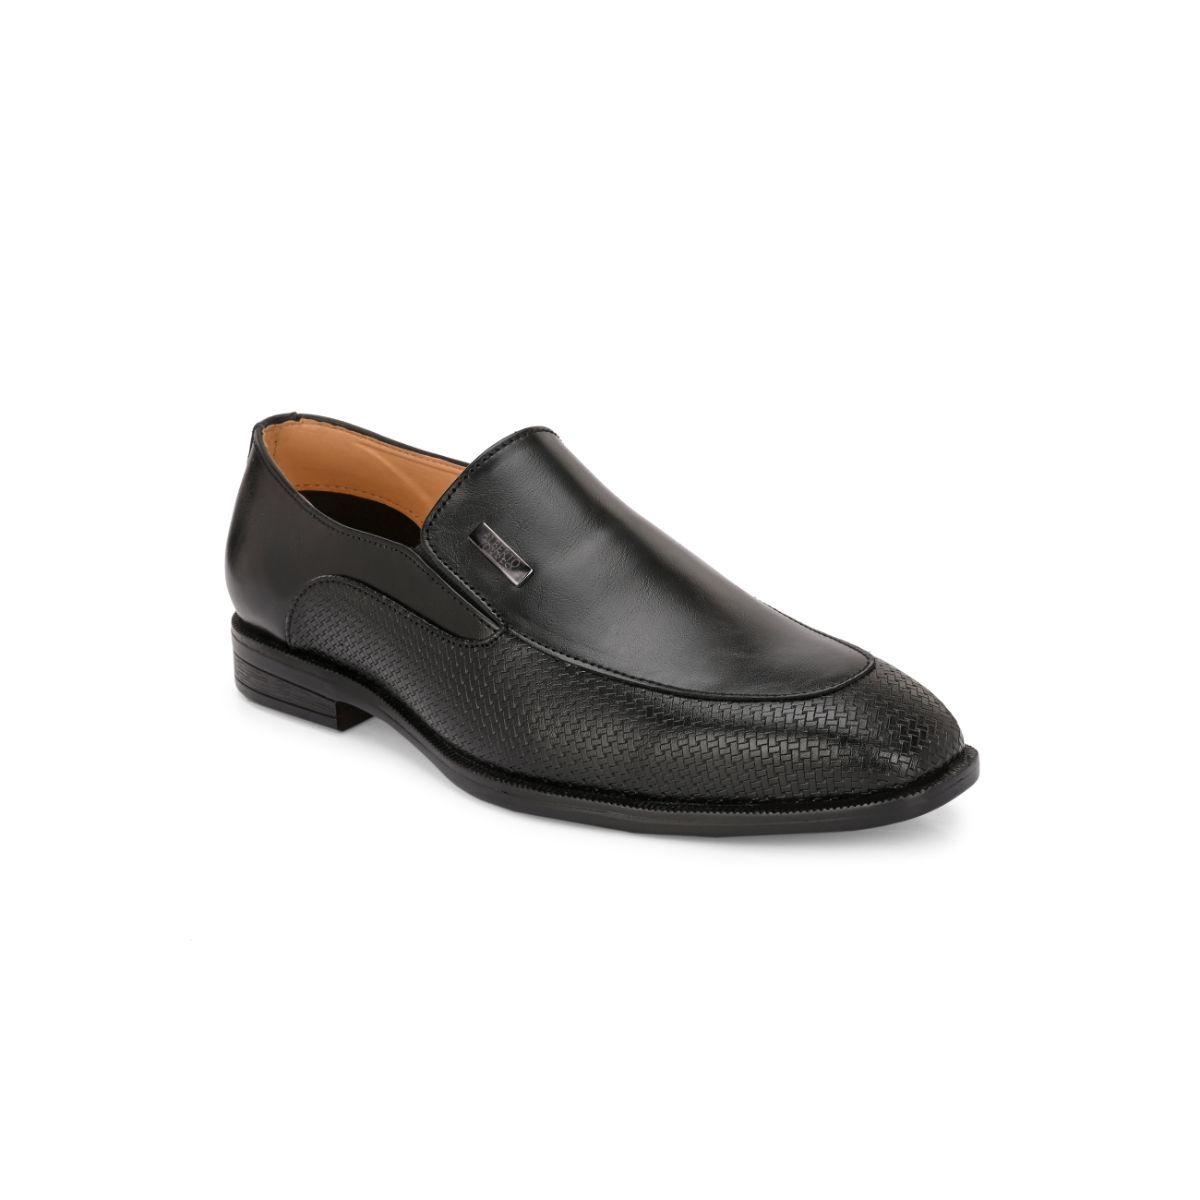 Latest Slipon Party-Daily Wear With Tpr Sole Formal Shoes- Black